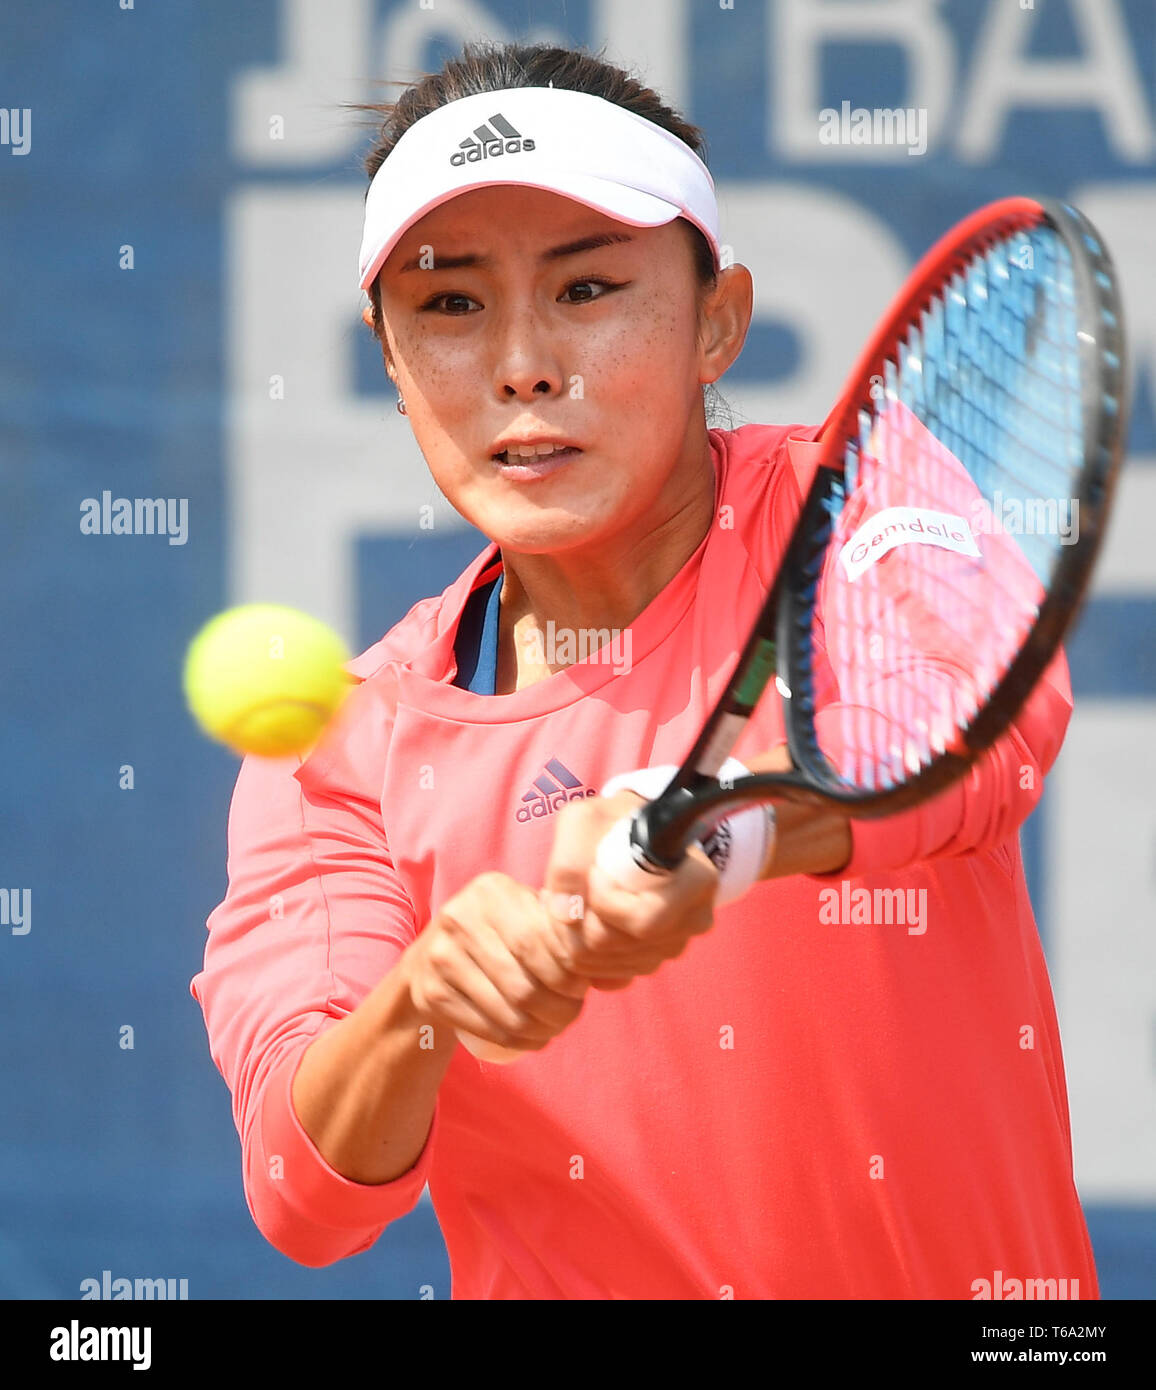 Prague, Czech Republic. 30th Apr, 2019. Tennis player Wang Qiang (China) is seen during match against Margarita Gasparyan (Russia) within the 1st round of the J&T Banka Prague Open, on April 30, 2019, in Prague, Czech Republic. Credit: Ondrej Deml/CTK Photo/Alamy Live News Stock Photo